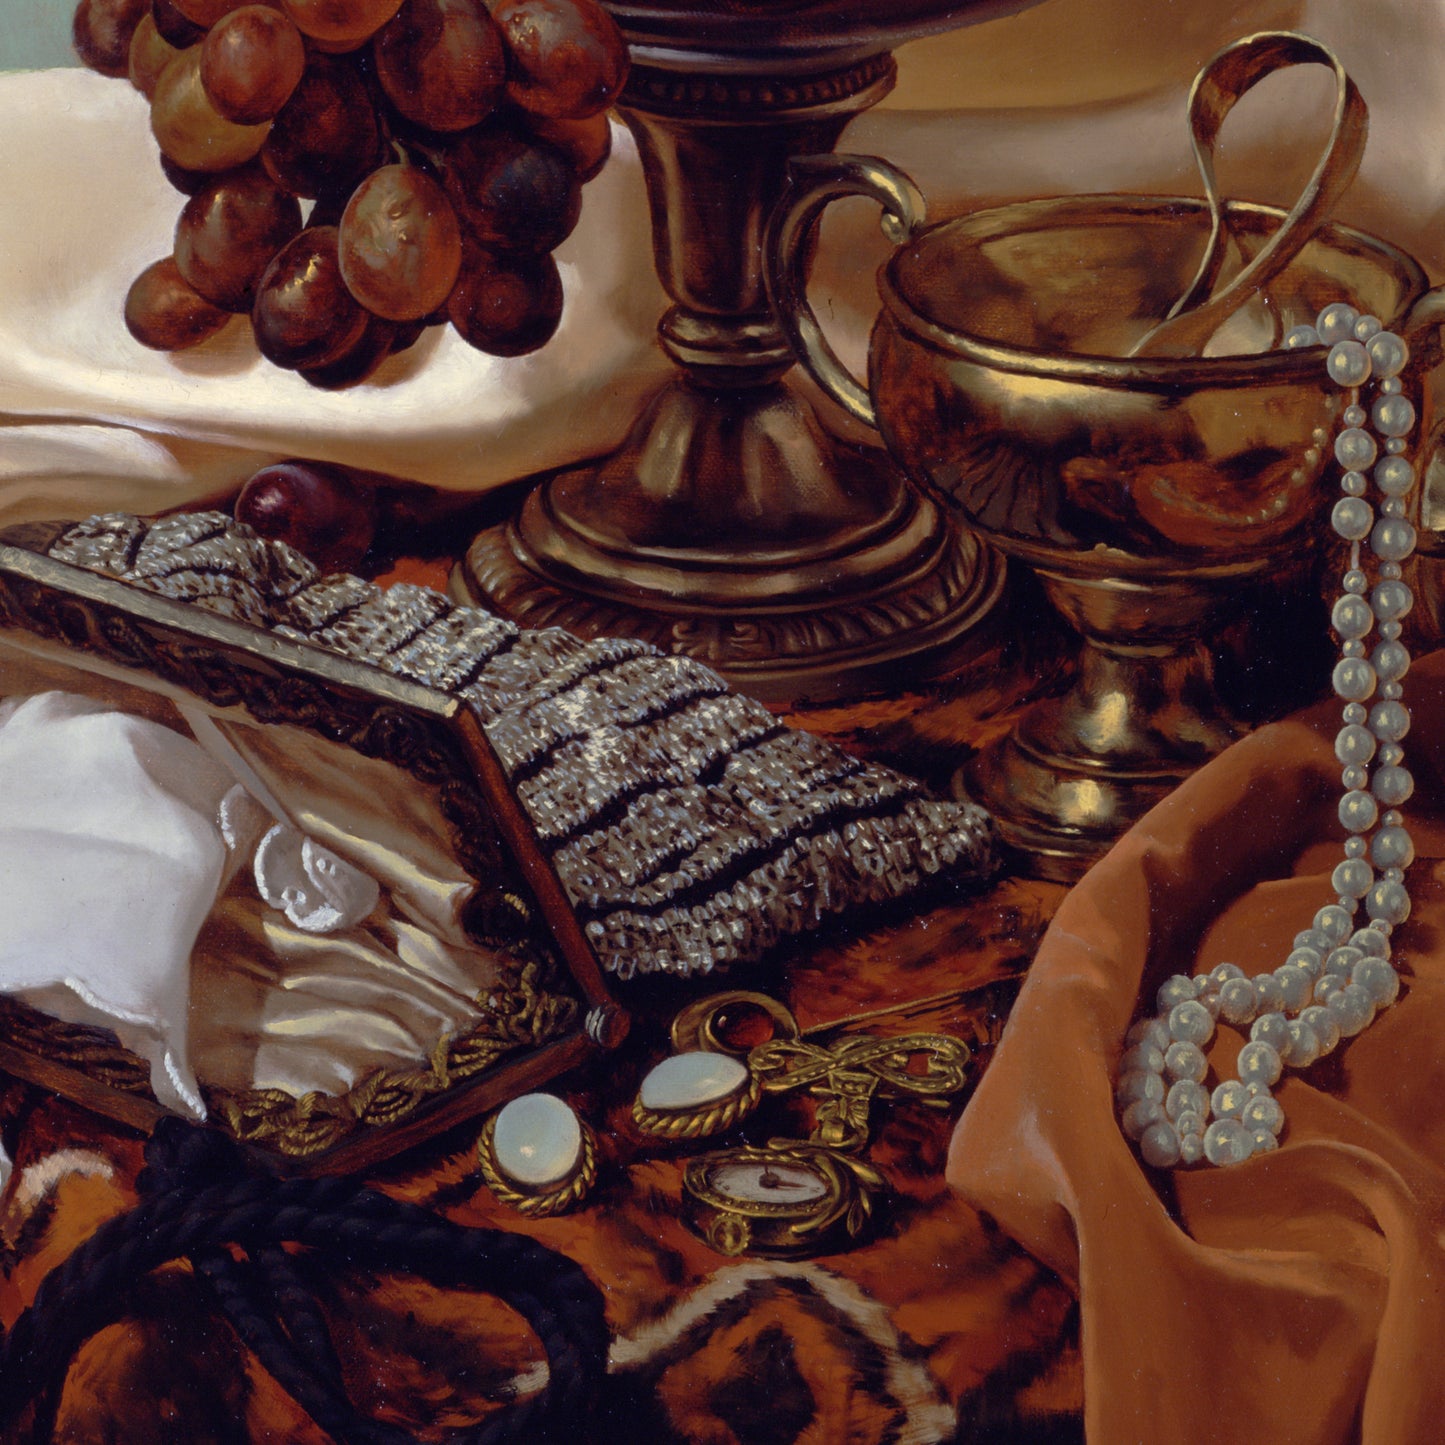 a painting showing gold and white with a red carpet, in the style of meticulous photorealistic still lifes, jewelry by painters and sculptors, detailed drapery, light indigo and brown, canon ae-1, eastern brushwork, metalwork jewelry 